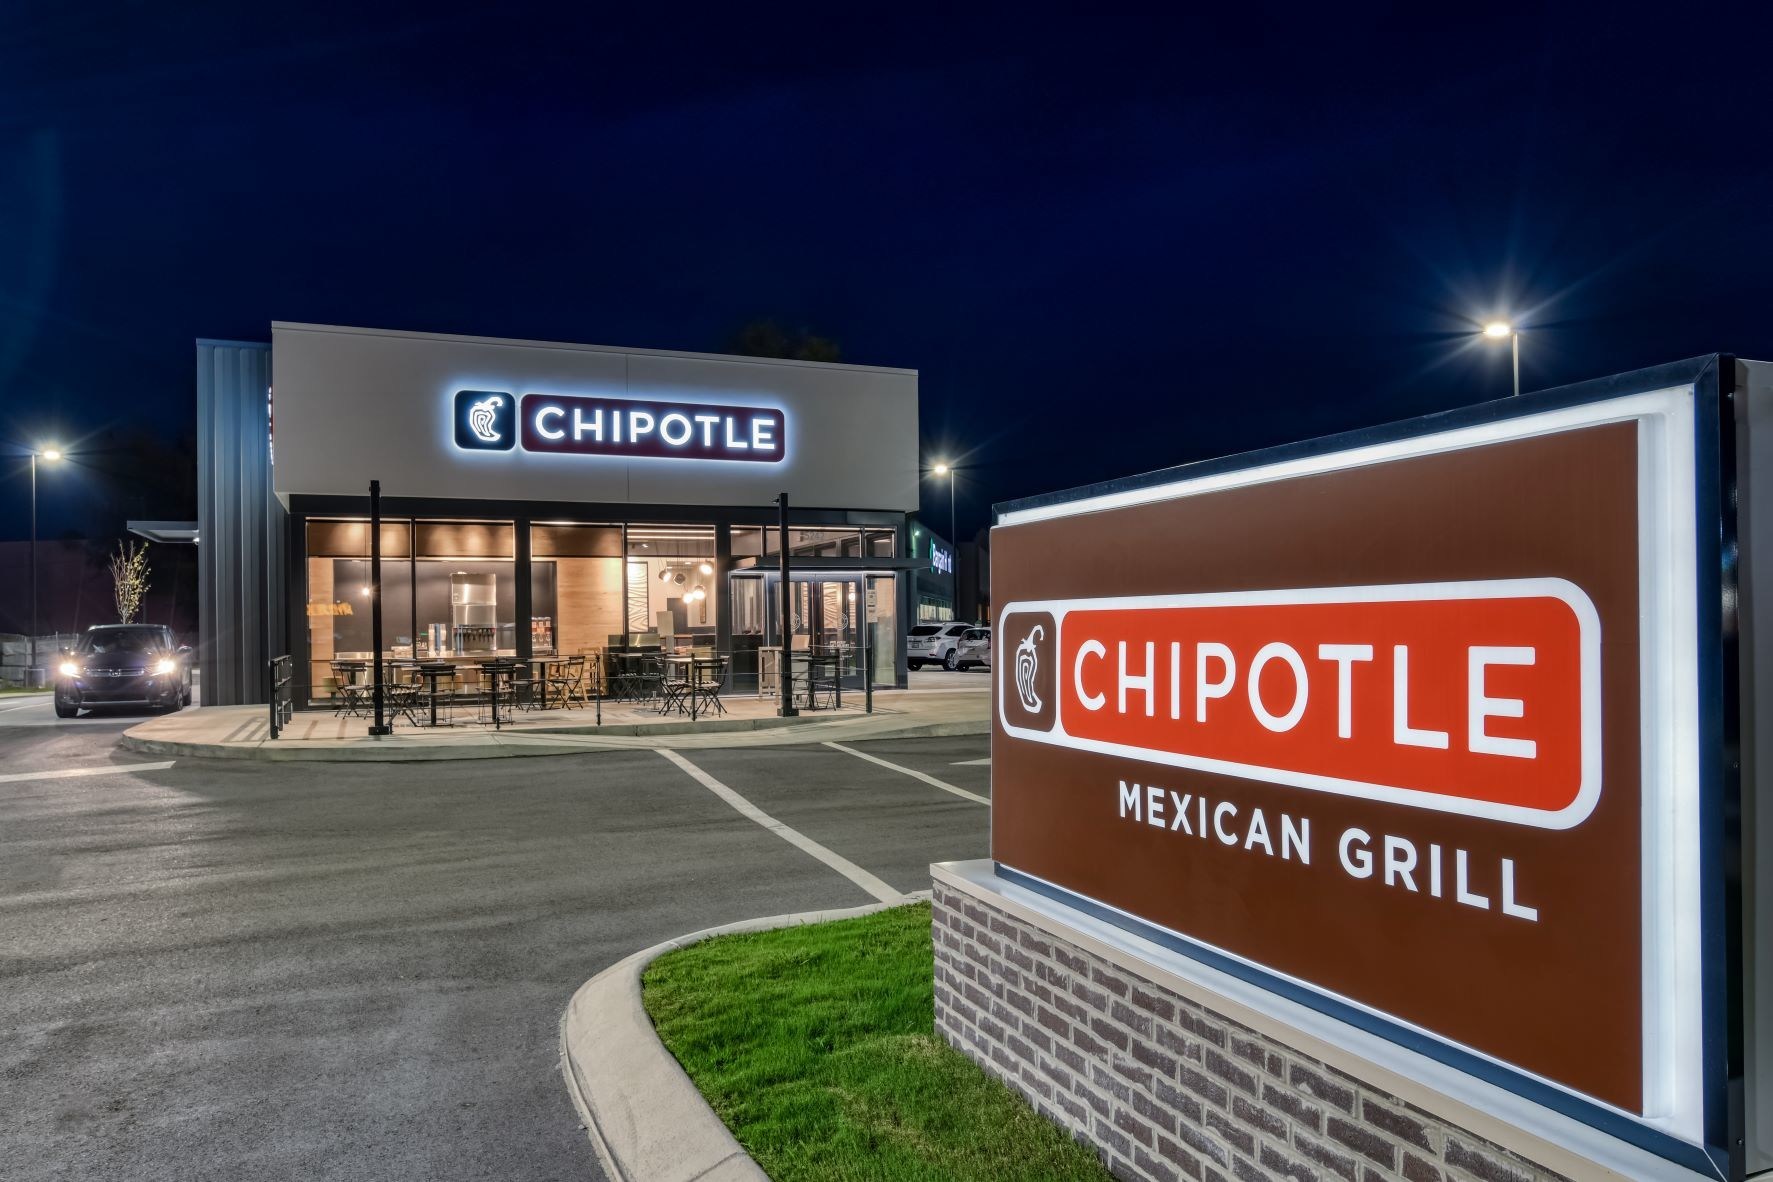 Chipotle storefront at night